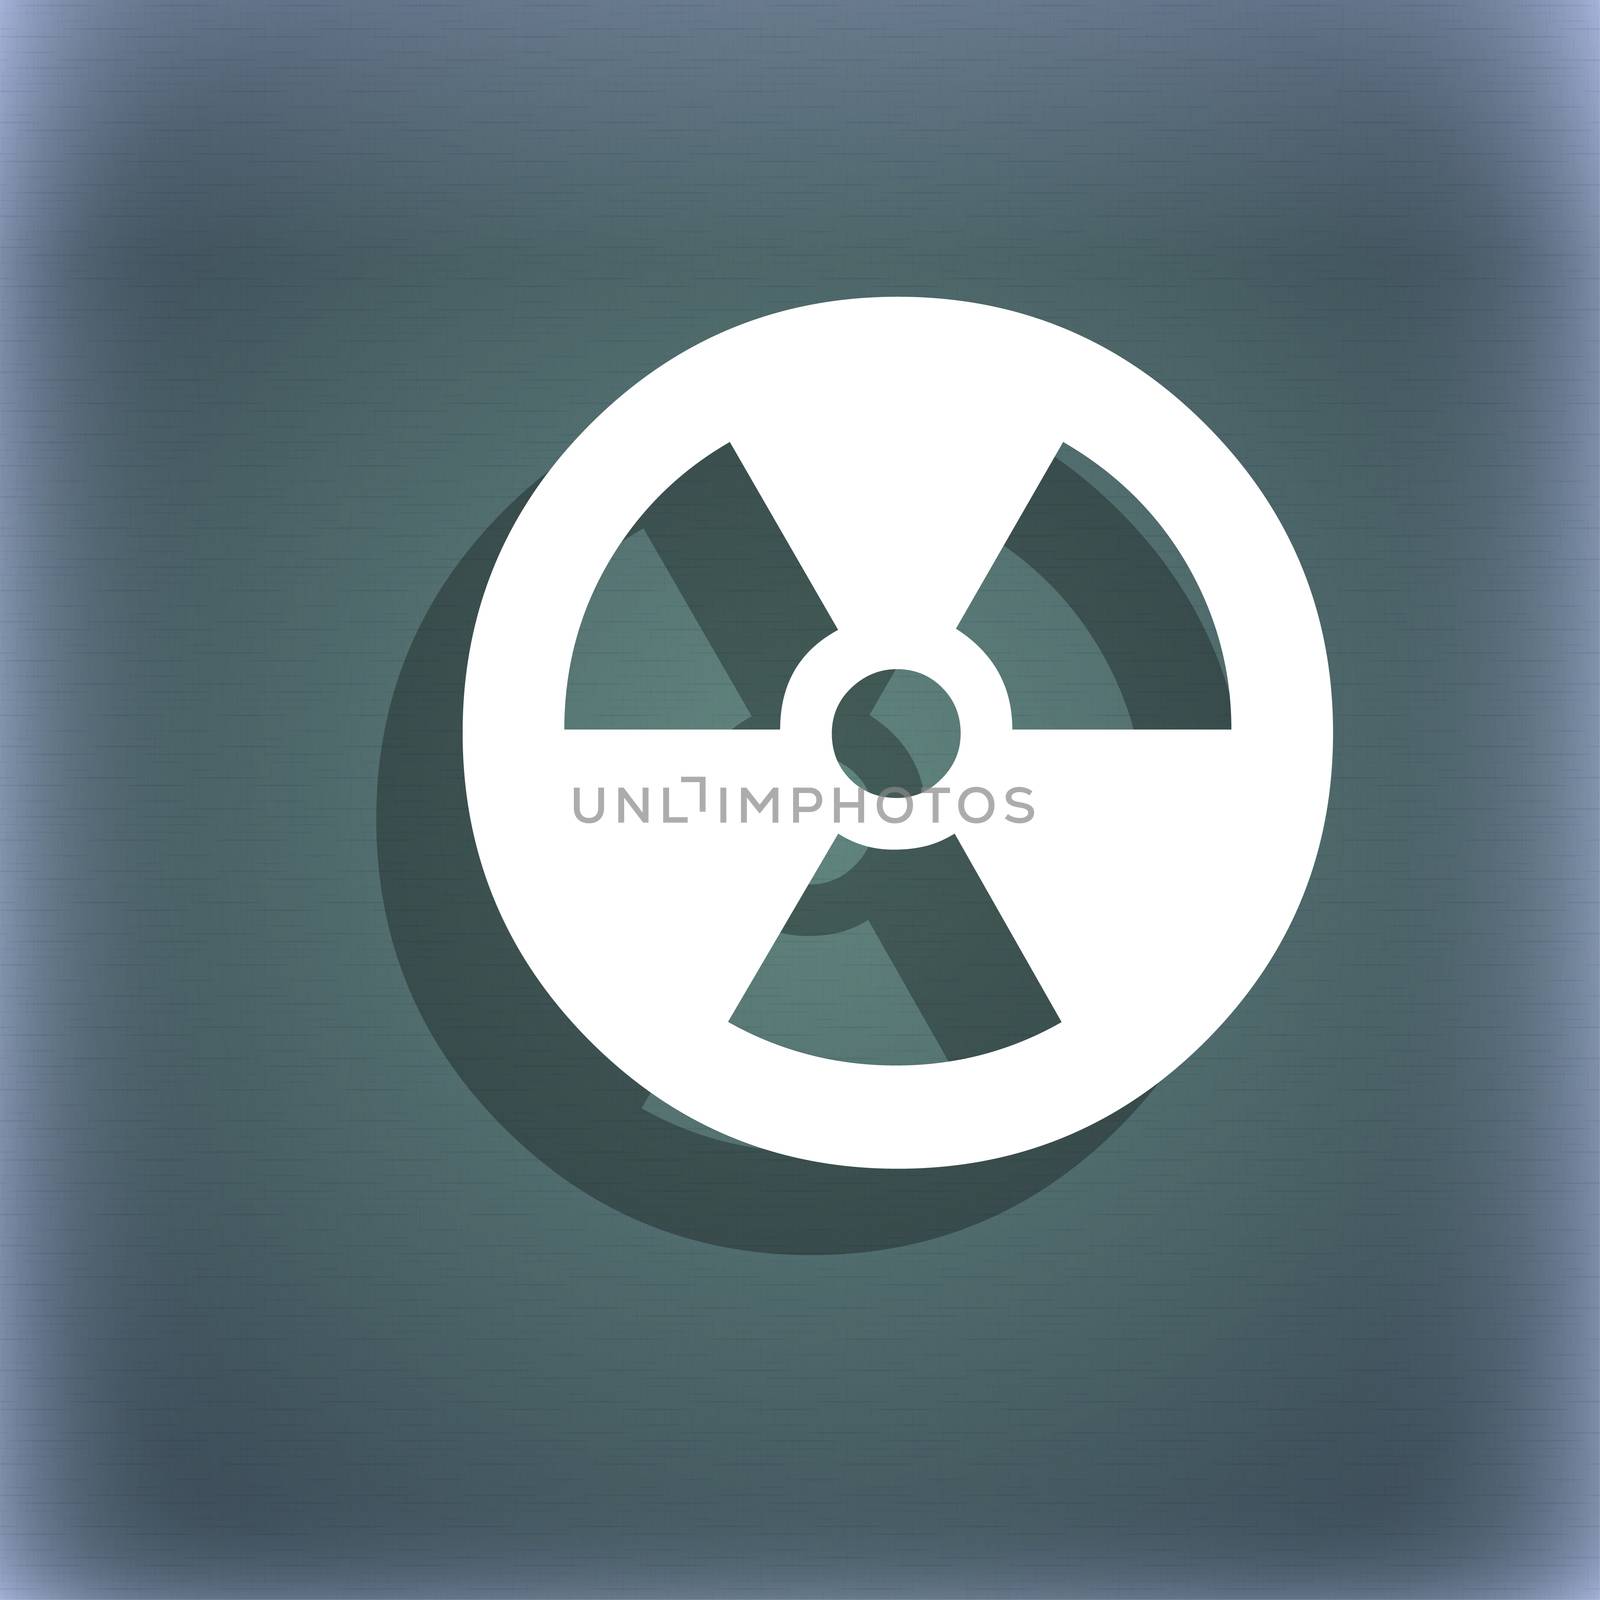 radiation icon symbol on the blue-green abstract background with shadow and space for your text. illustration